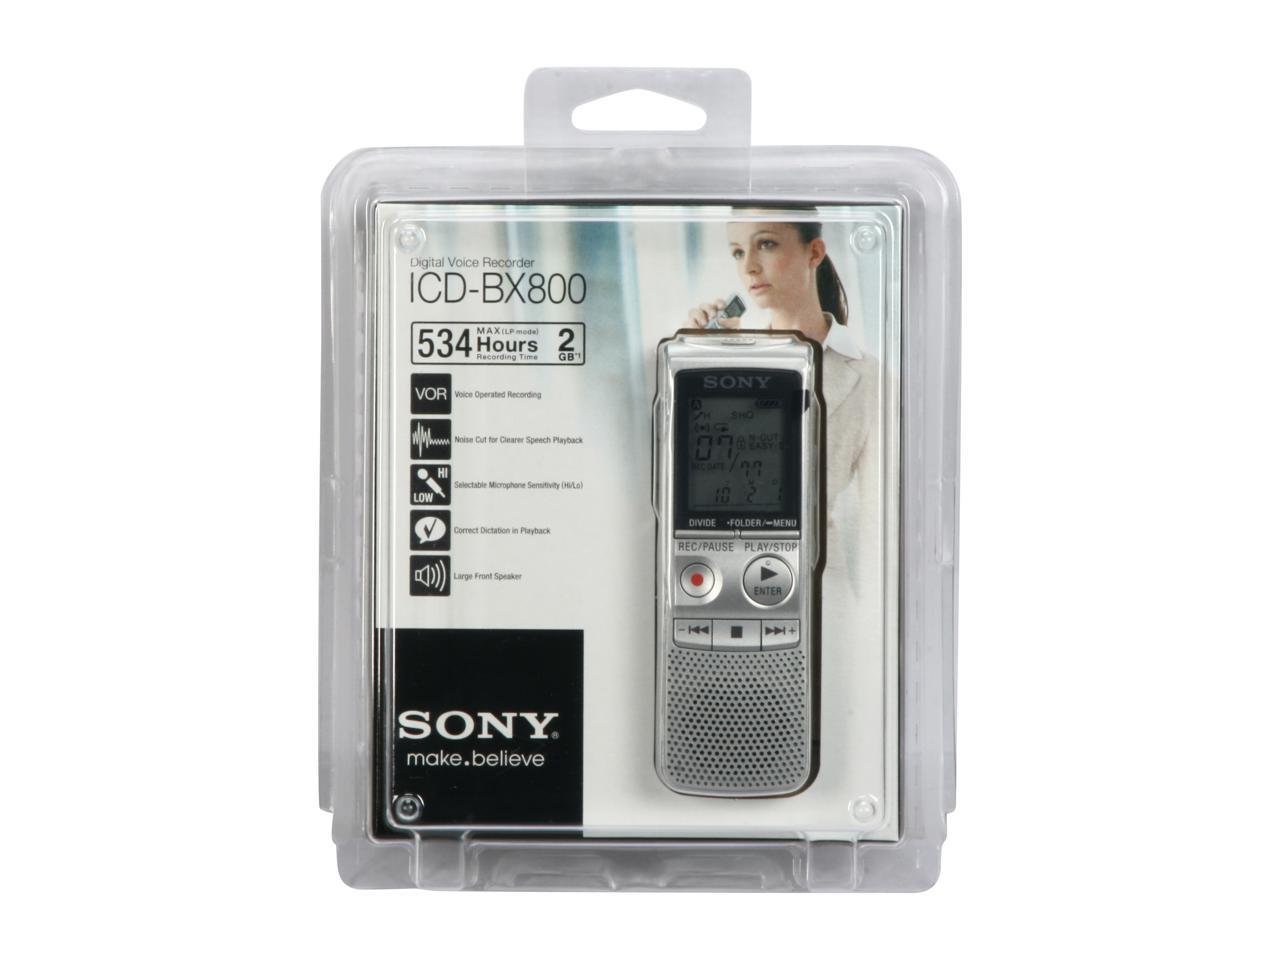 Details about   Sony ICD-BX800 2 GB Flash Memory Digital Voice Recorder Silver 